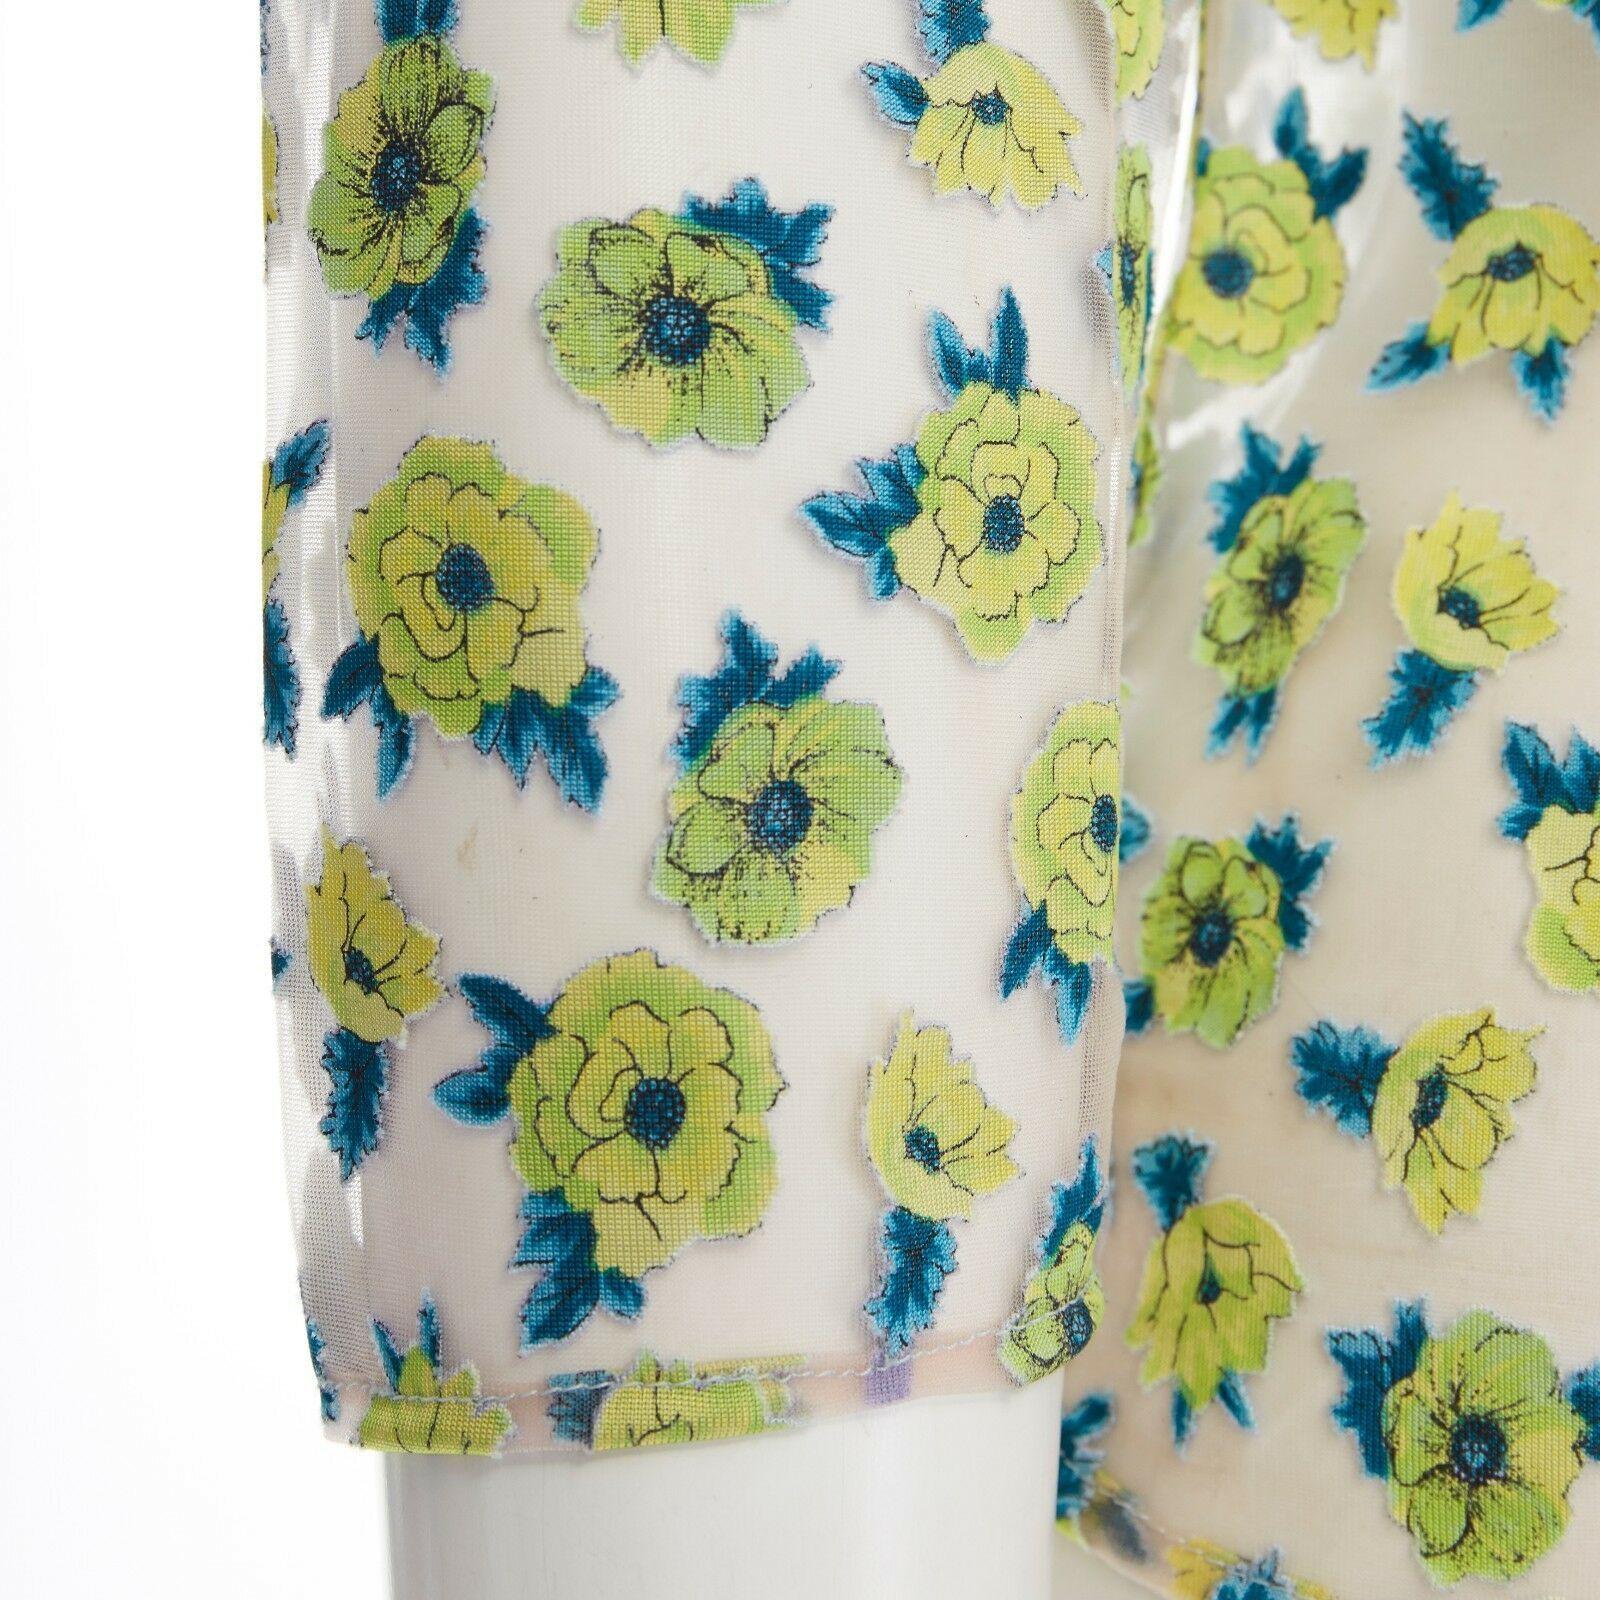 GIANNI VERSACE Vintage SS96 green floral sheer devore cropped sleeve top IT40 S
GIANNI VERSACE VINTAGEFROM THE SPRING SUMMER 1996 COLLECTION
Rayon, nylon. 
Clear sheer base with yellow and teal blue floral devore. 
Rounded neckline. 
3/4 sleeves.